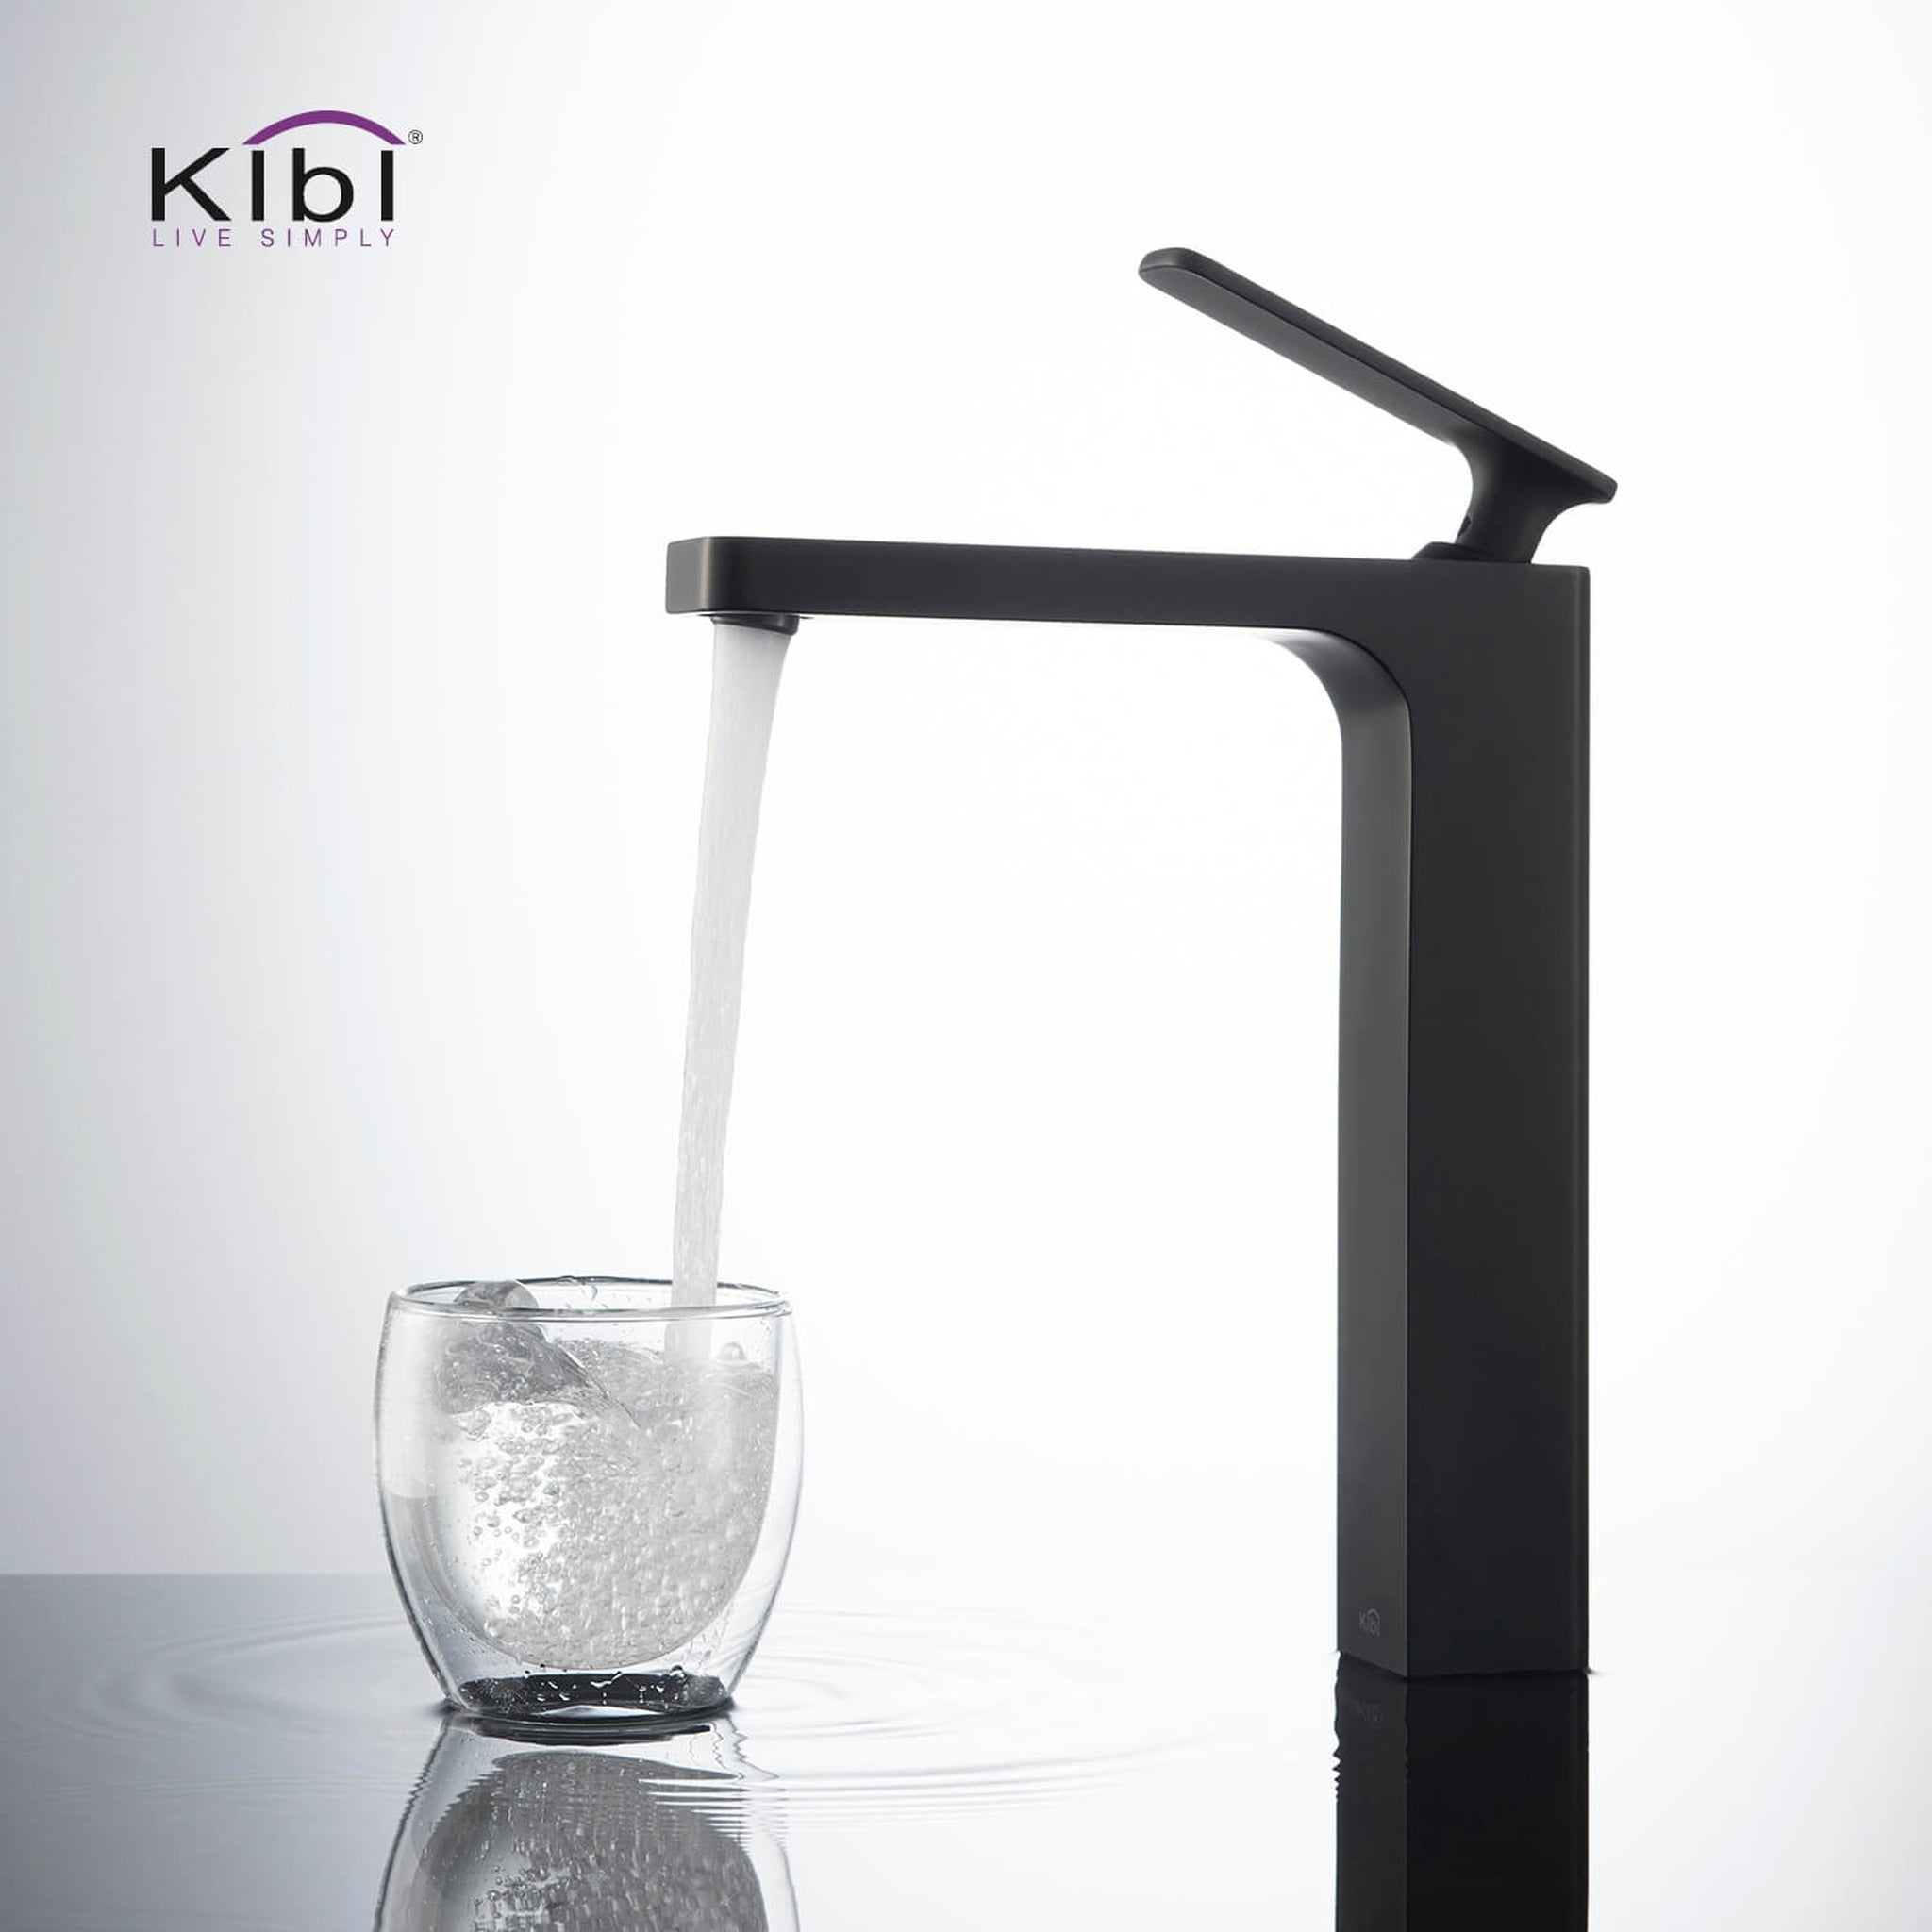 KIBI, KIBI Infinity Single Handle Matte Black Solid Brass Bathroom Vanity Vessel Sink Faucet With Pop-Up Drain Stopper Small Cover Without Overflow